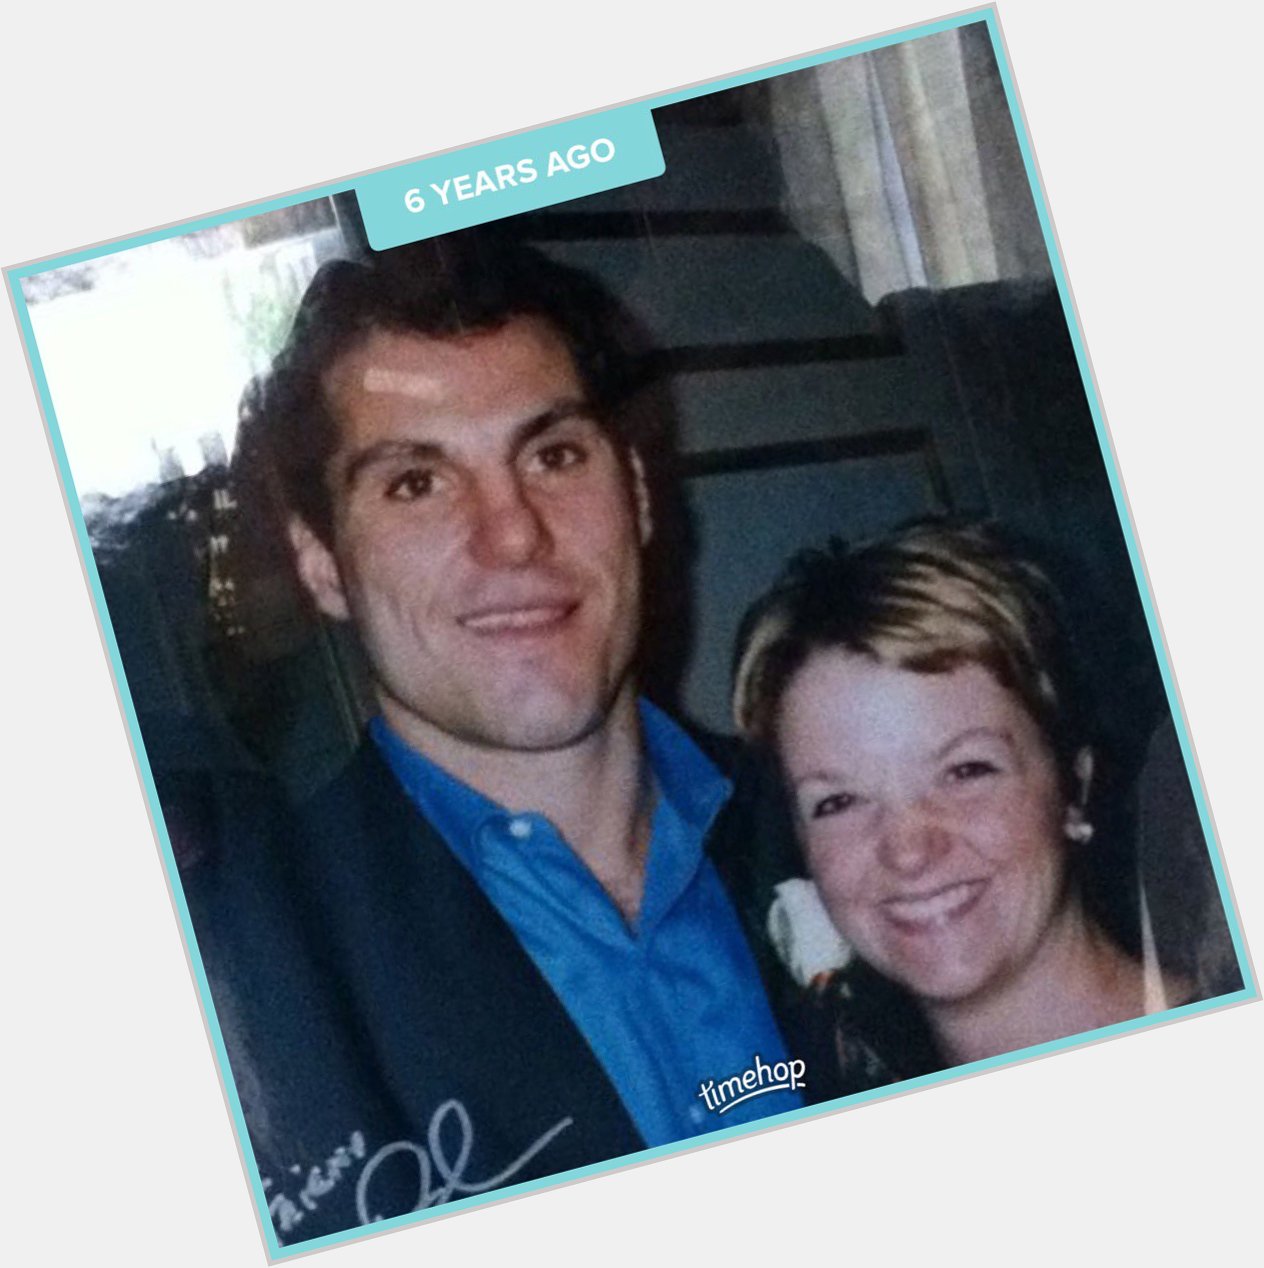 My love for this man began in \88..this pic is from 2000. Happy bday to the one &  only Rick Tocchet! 